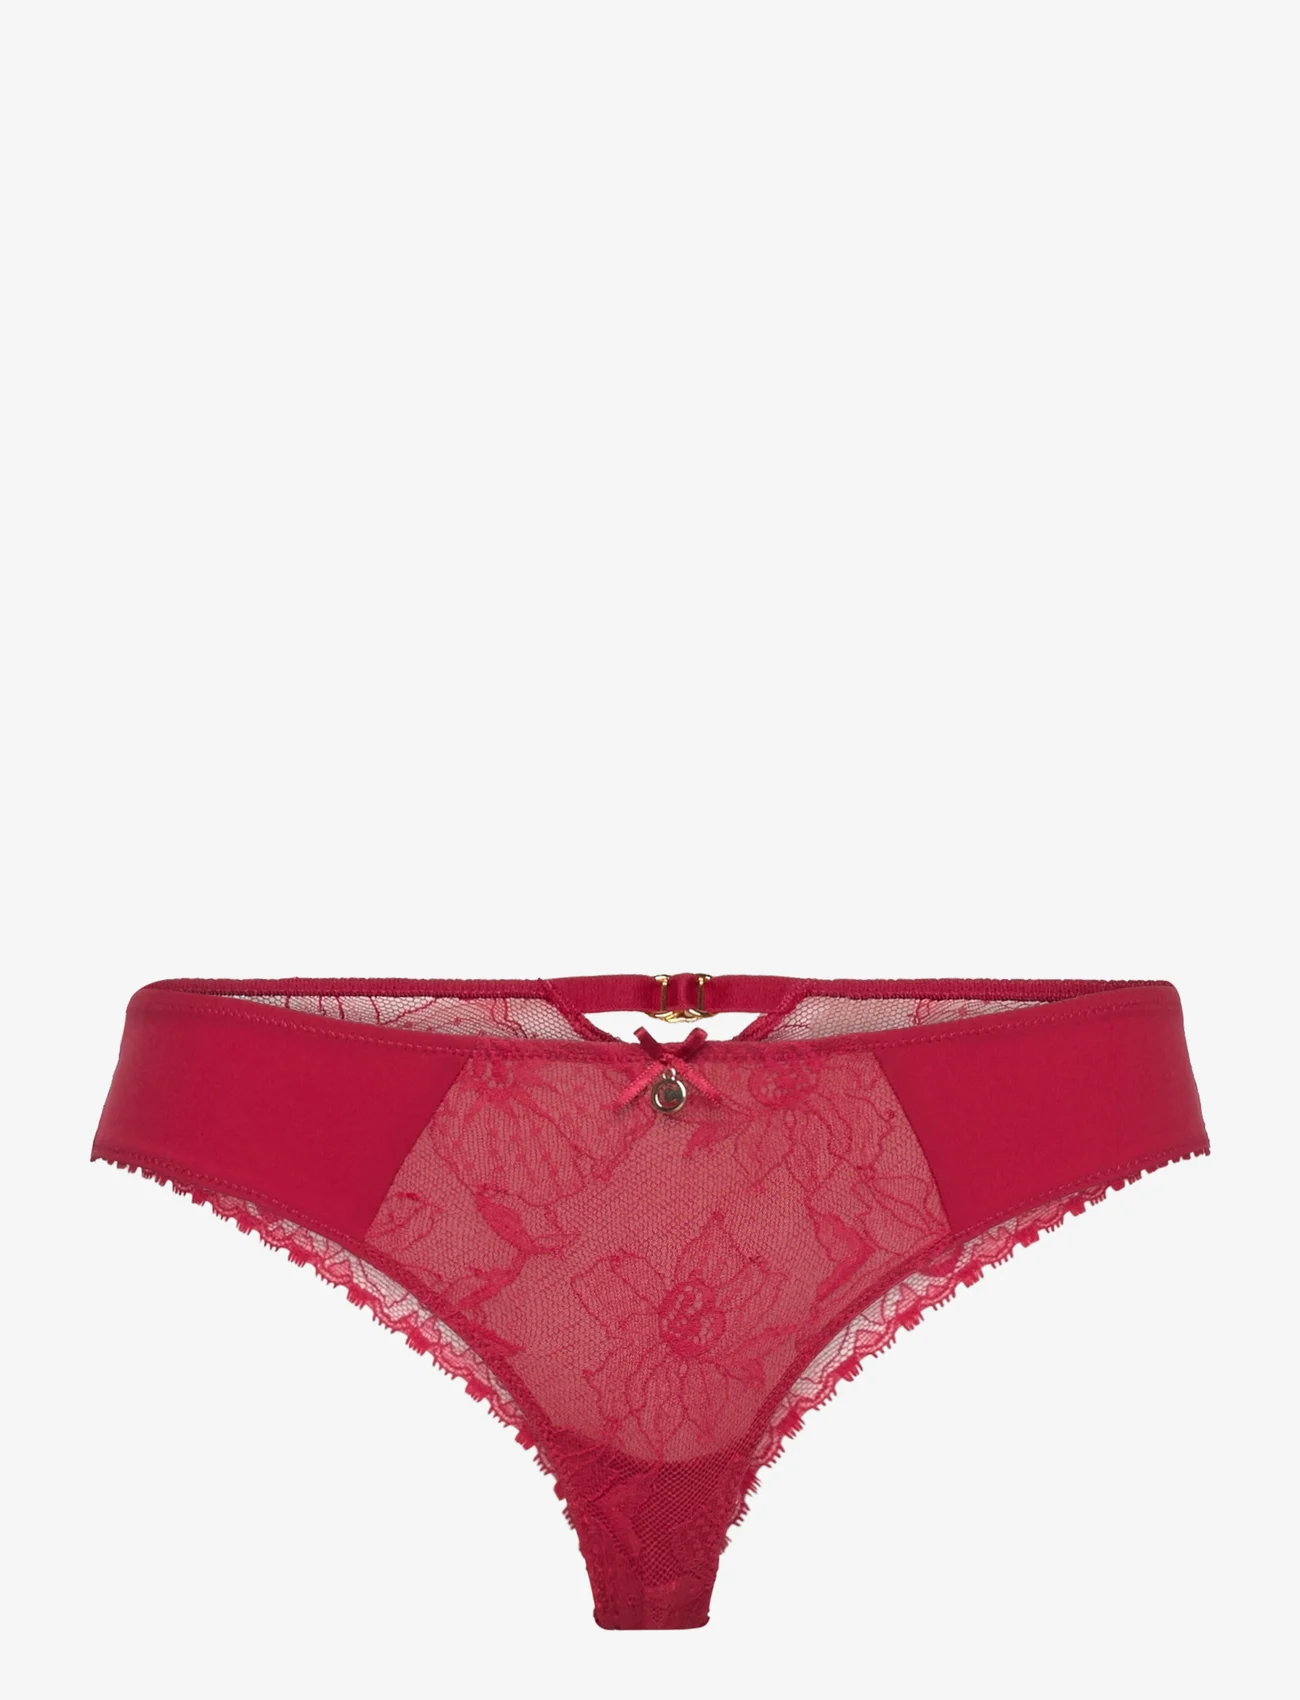 CHANTELLE - Orchids Tanga - laveste priser - passion red - 0